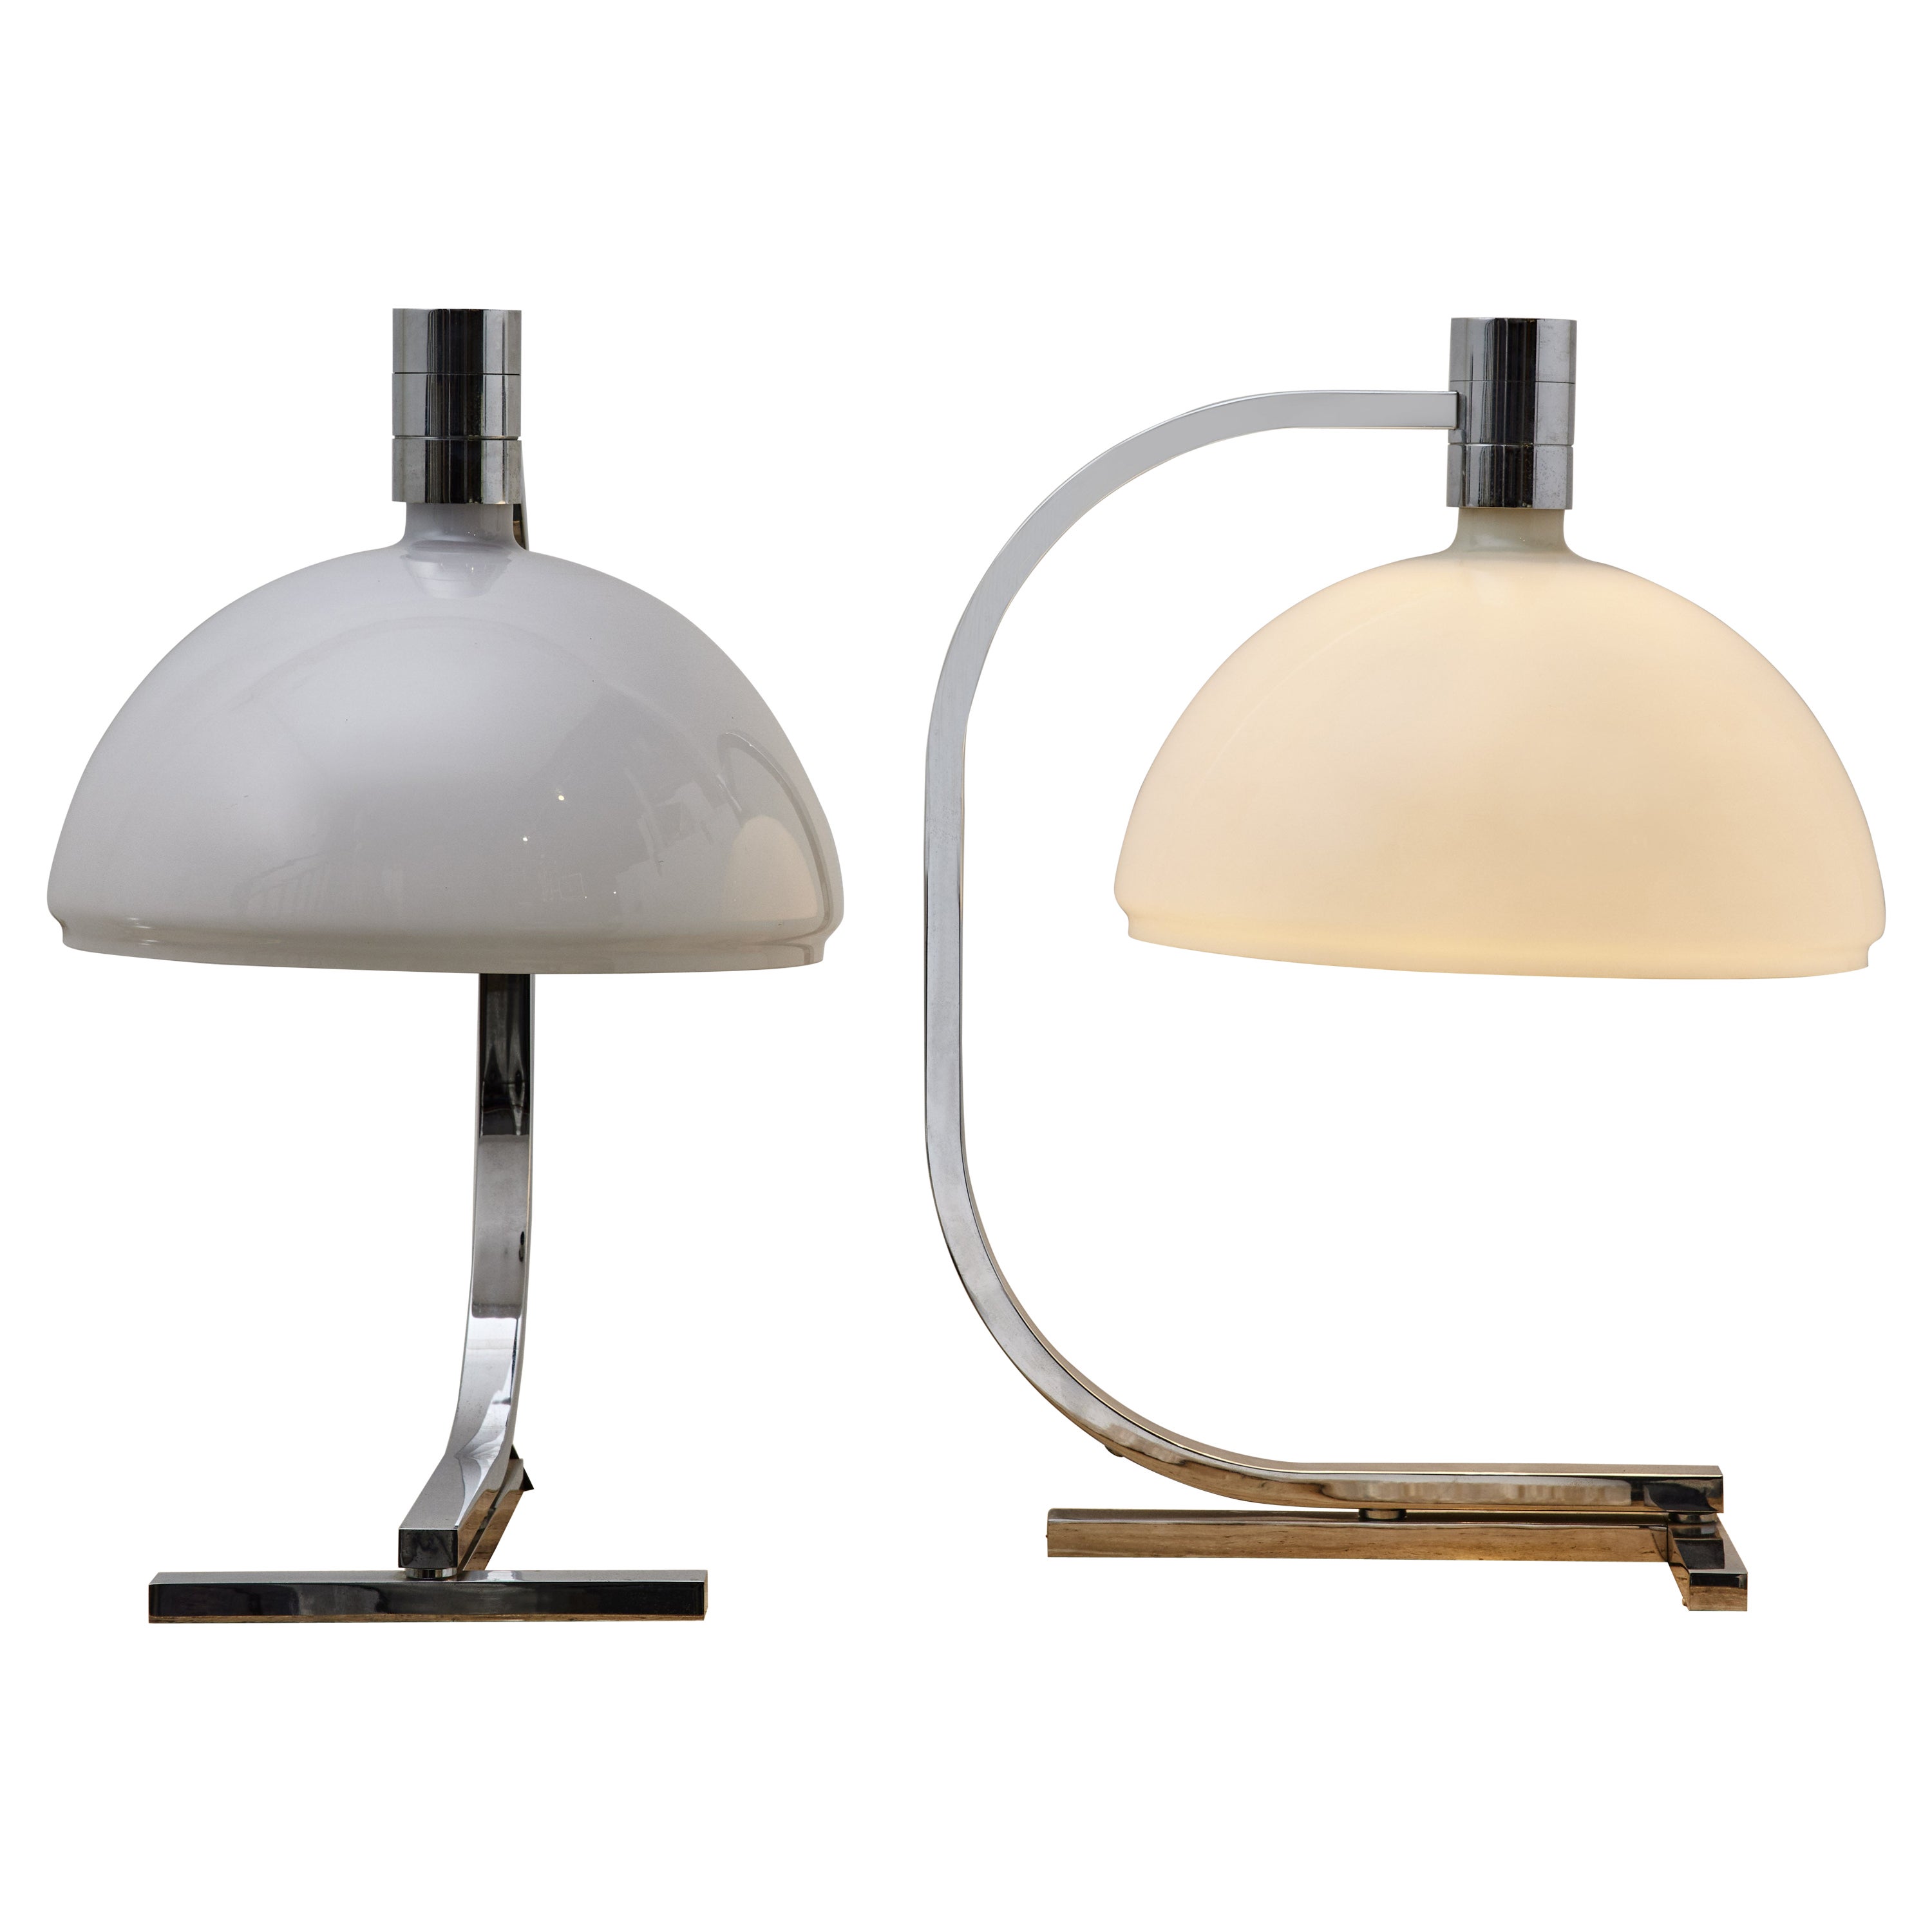 Vintage Table Lamps at Cost Price For Sale